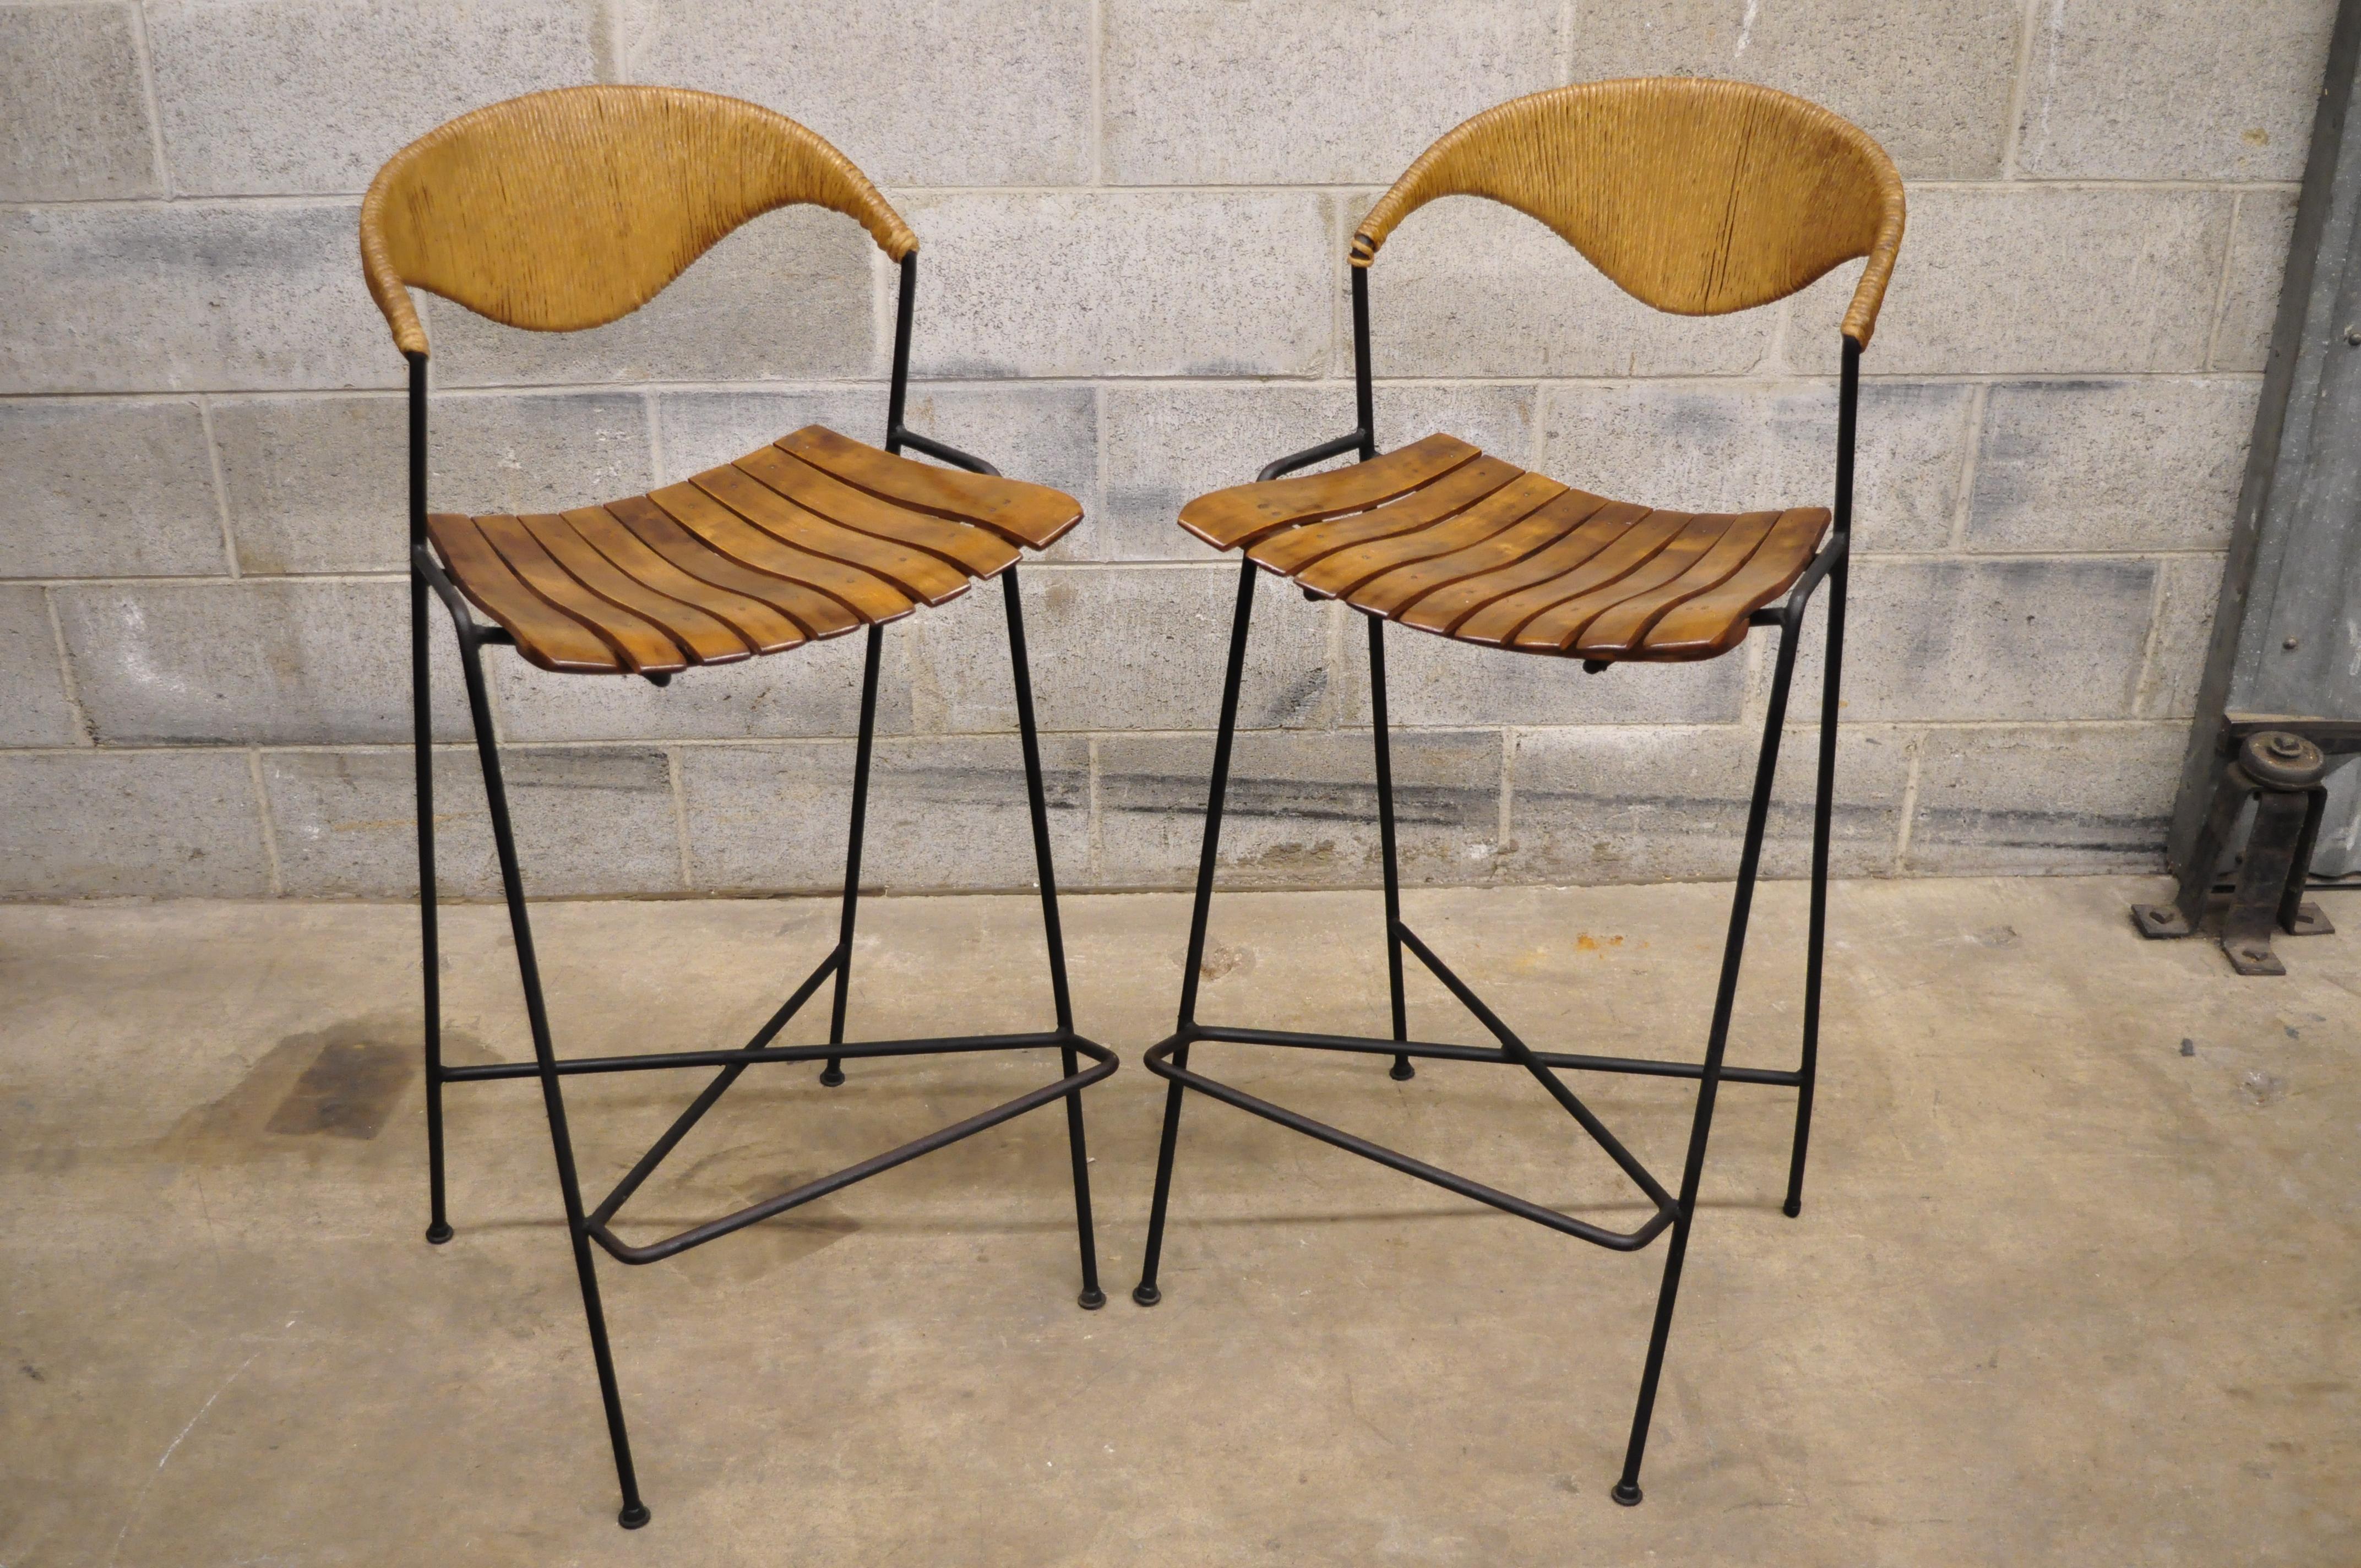 Mid-Century Modern Arthur Umanoff wrought iron and rattan bar and bar stools. Listing includes wrought iron frames, wood slat bar and seats, woven rattan backrests, laminate surface, (2) bar stools, (1) bar, very nice vintage item, great style and